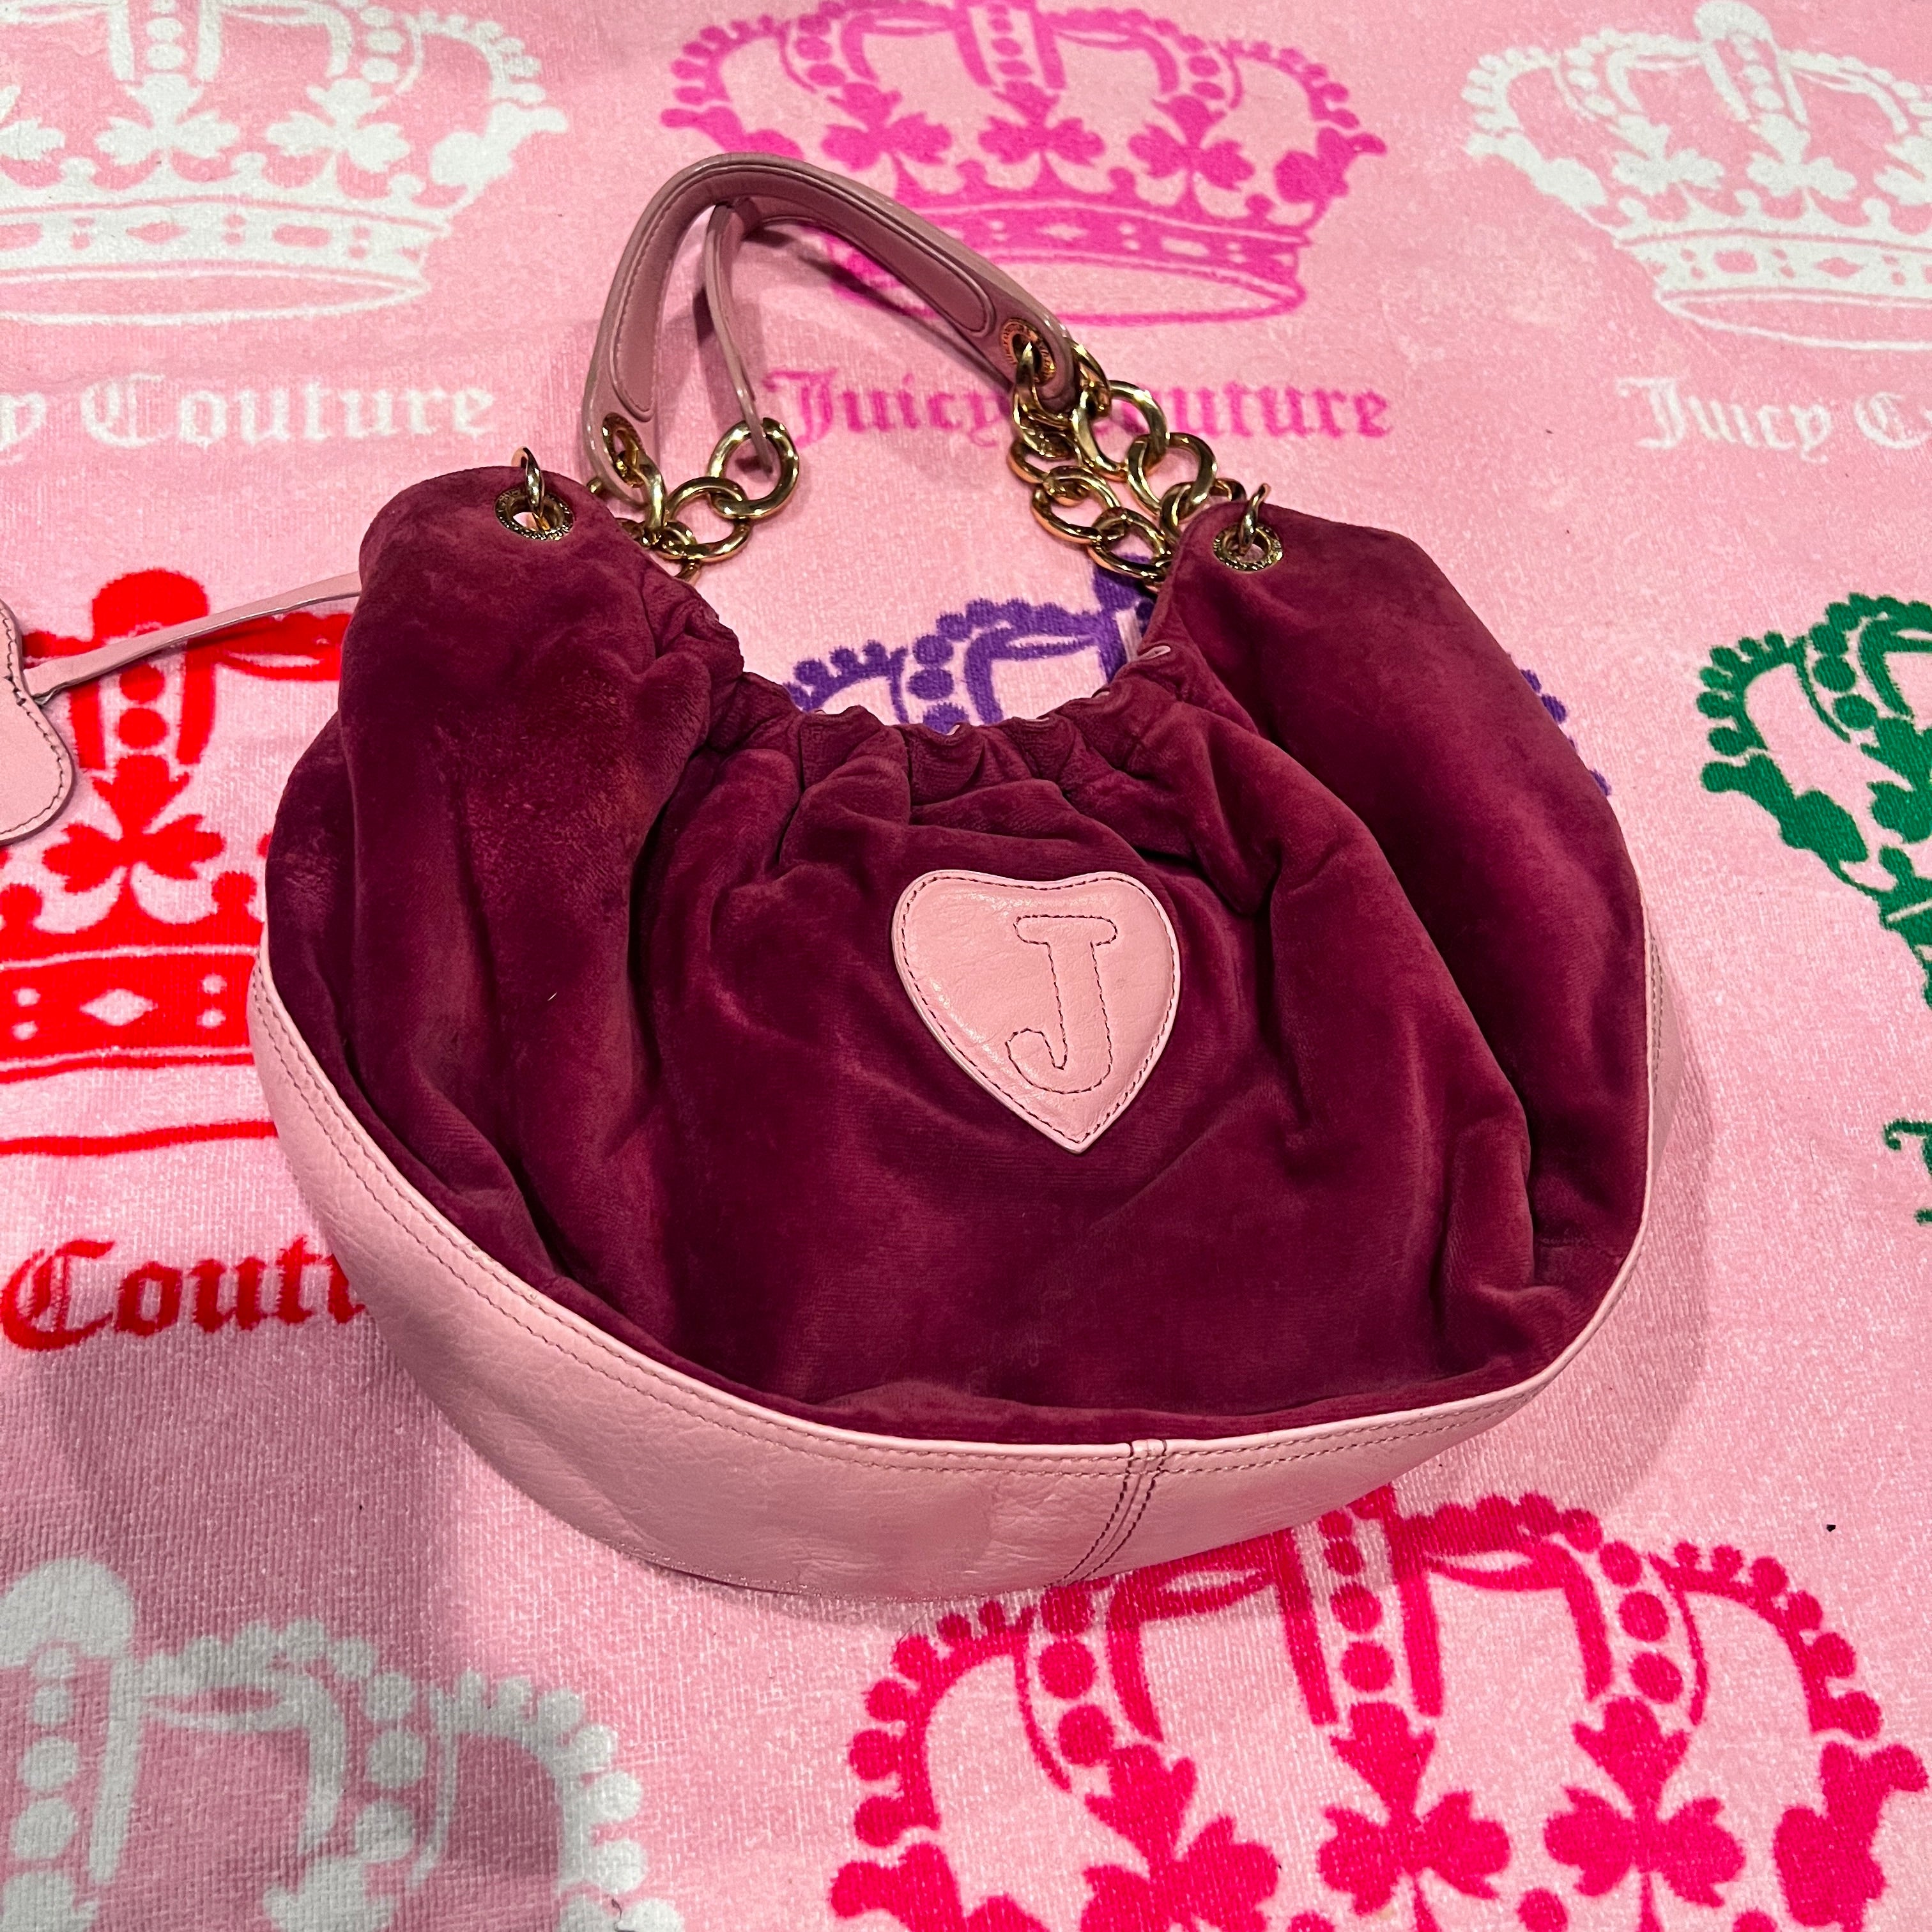 Juicy Couture | Bags | Royal Y2k Juicy Couture Purse | Poshmark